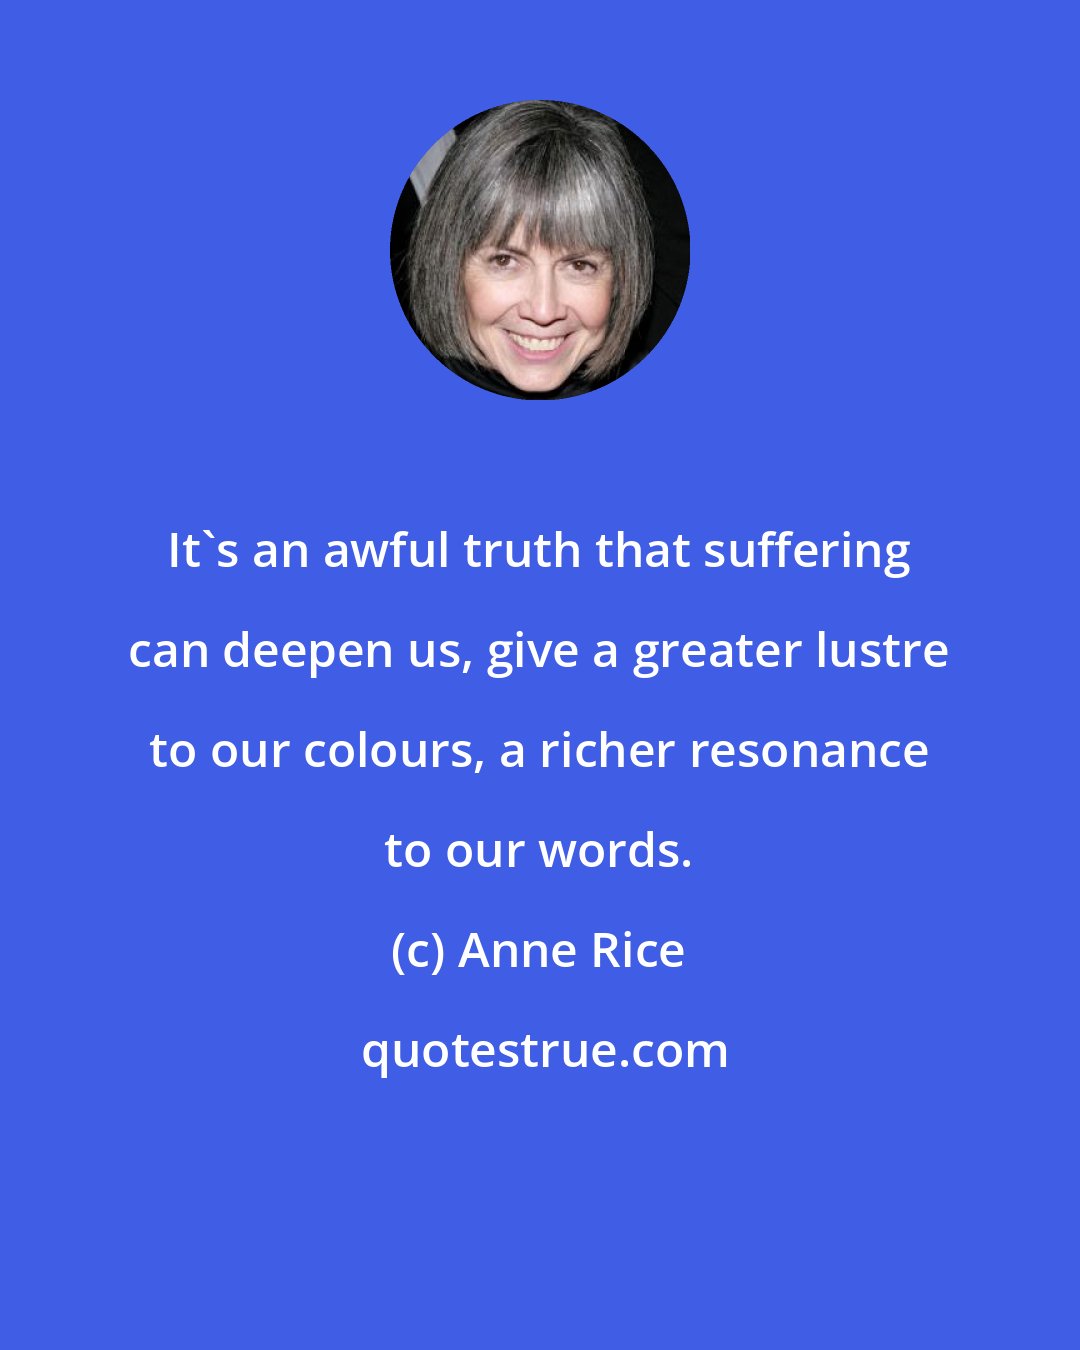 Anne Rice: It's an awful truth that suffering can deepen us, give a greater lustre to our colours, a richer resonance to our words.